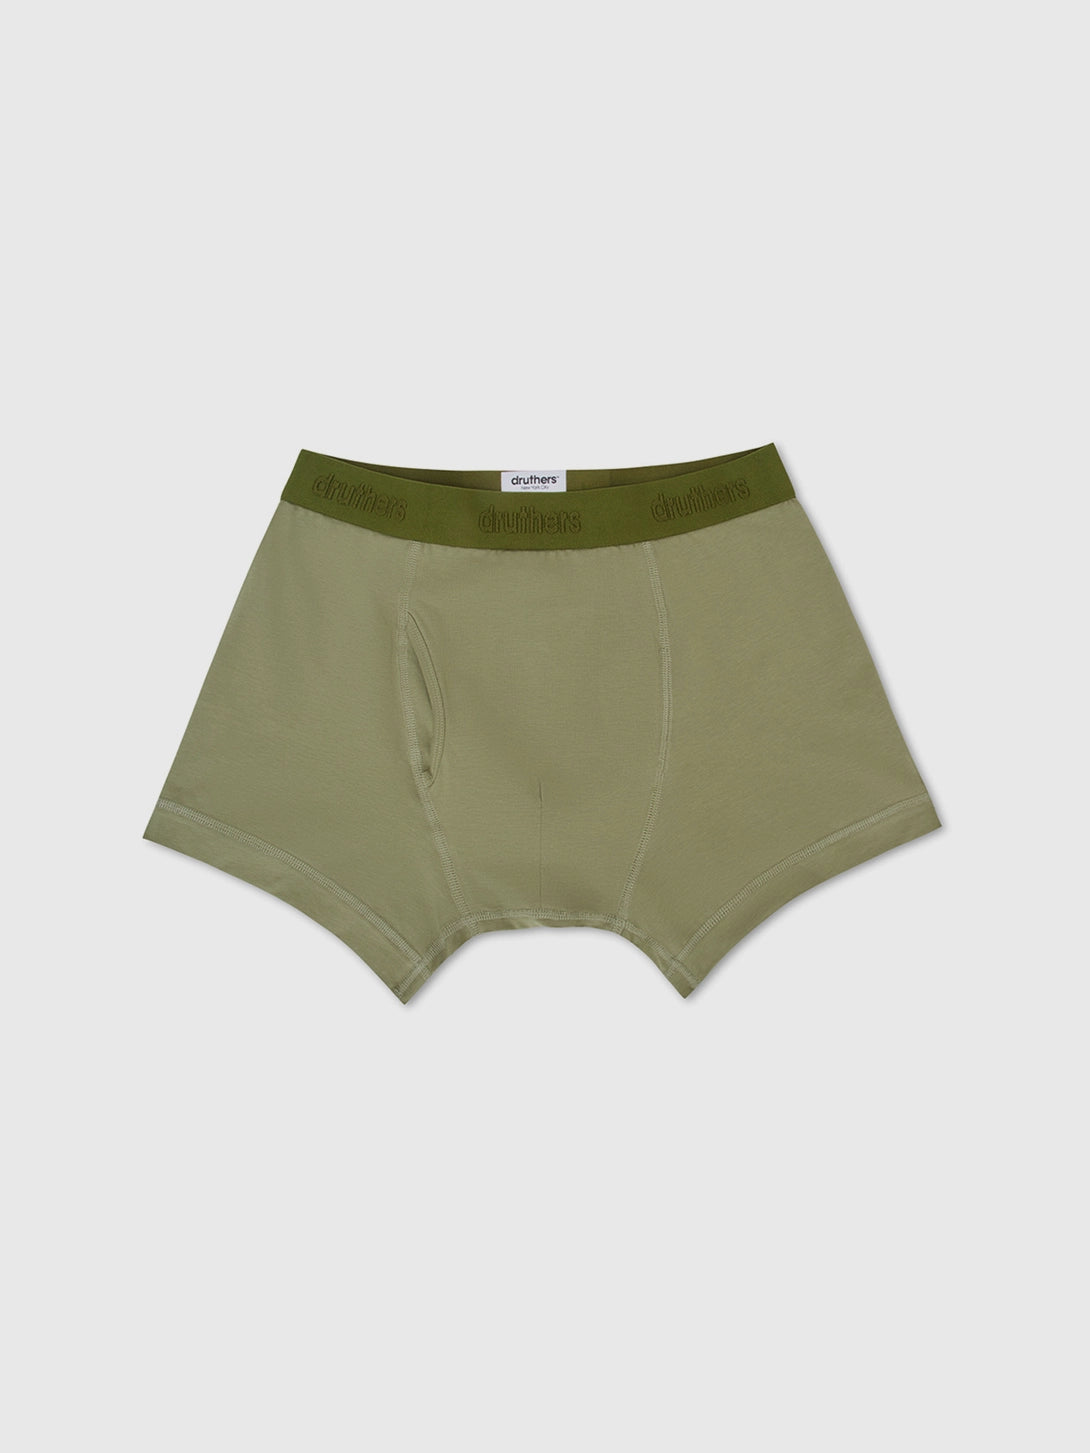 Dusty Olive boxer brief by druthers